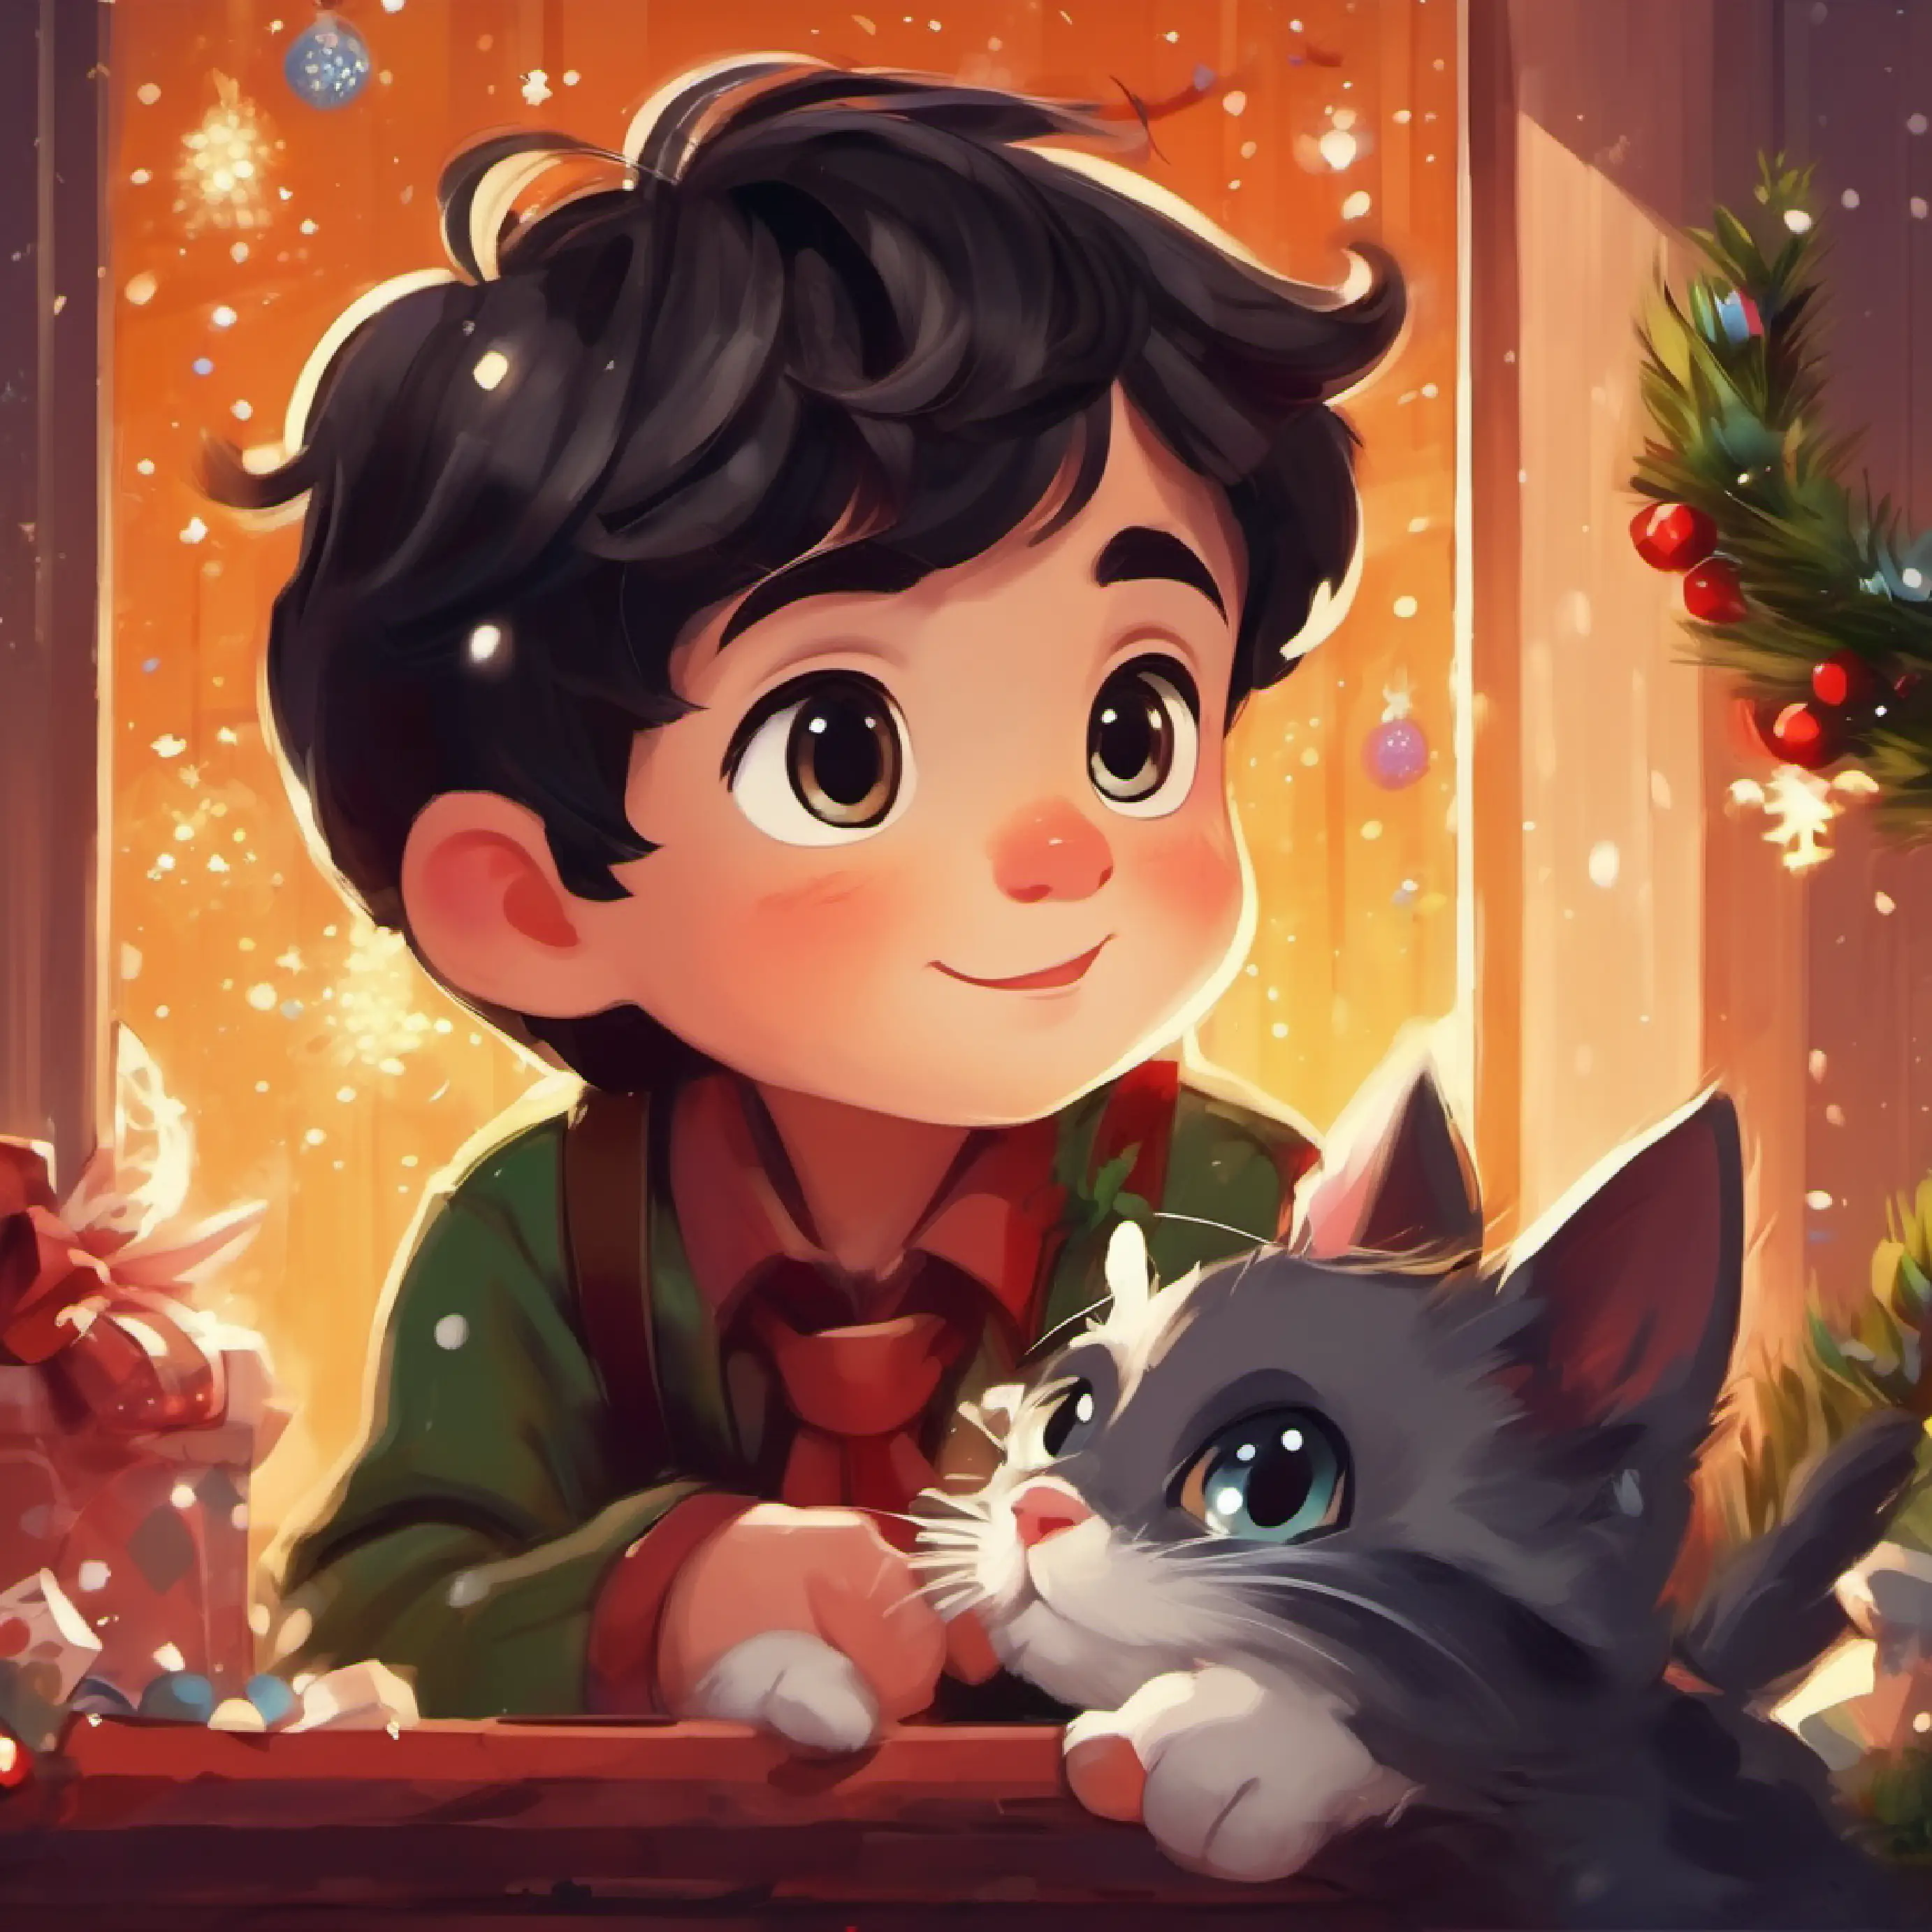 Dark-haired, dark-eyed boy, cute as a button finds a kitten, acts kindly